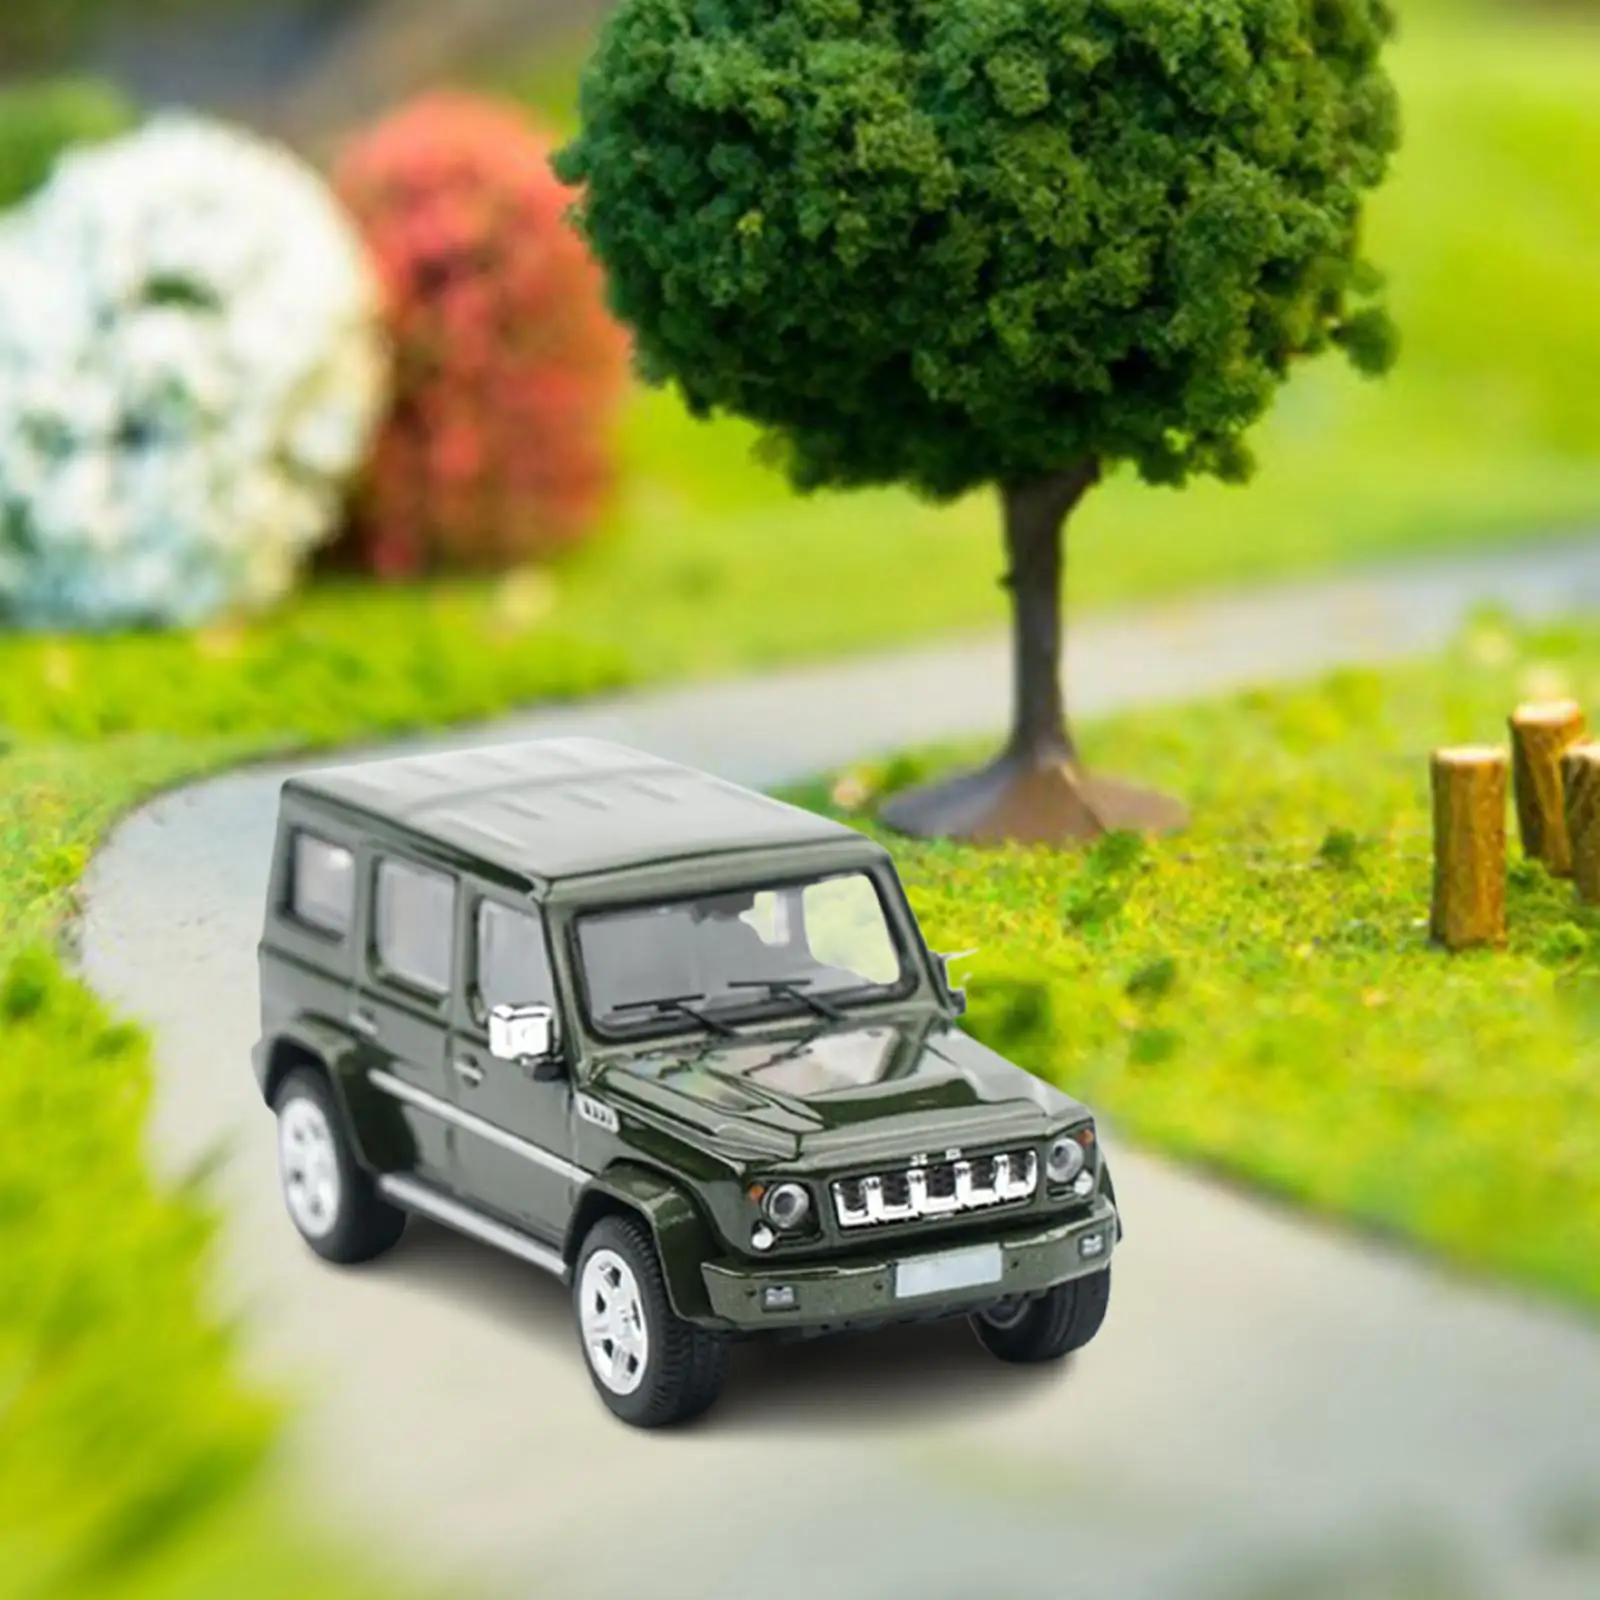 1:64 Diorama Street Car Model Diecast Toys Realistic Mini Vehicles Toys for Dollhouse Photography Props Scenery Landscape Layout